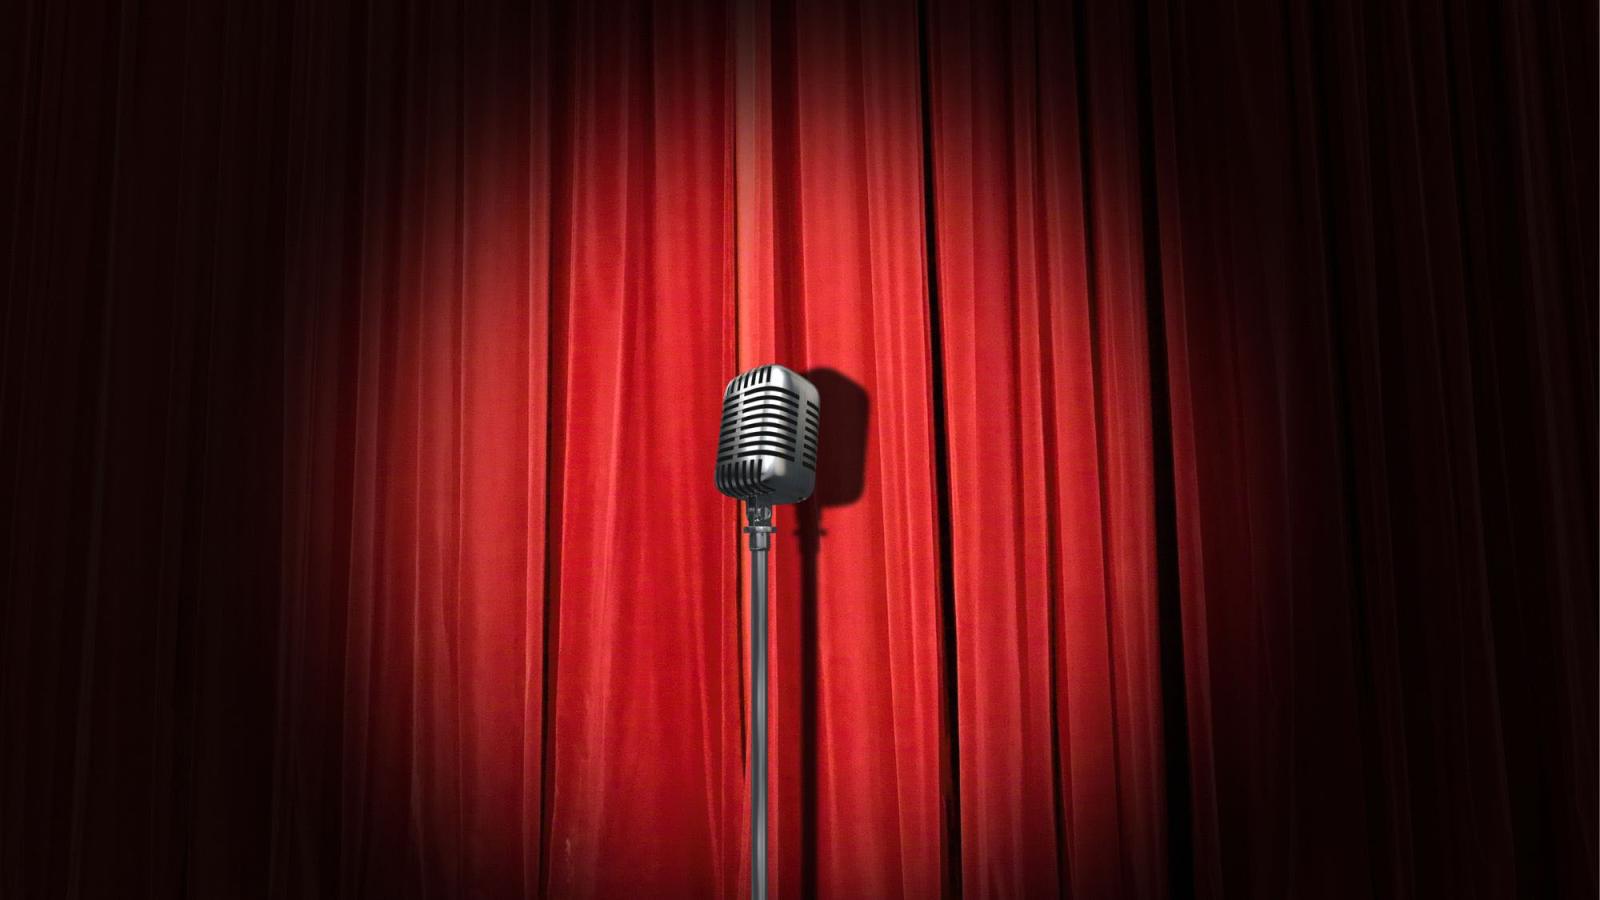 microphone in spotlight against red theater curtains